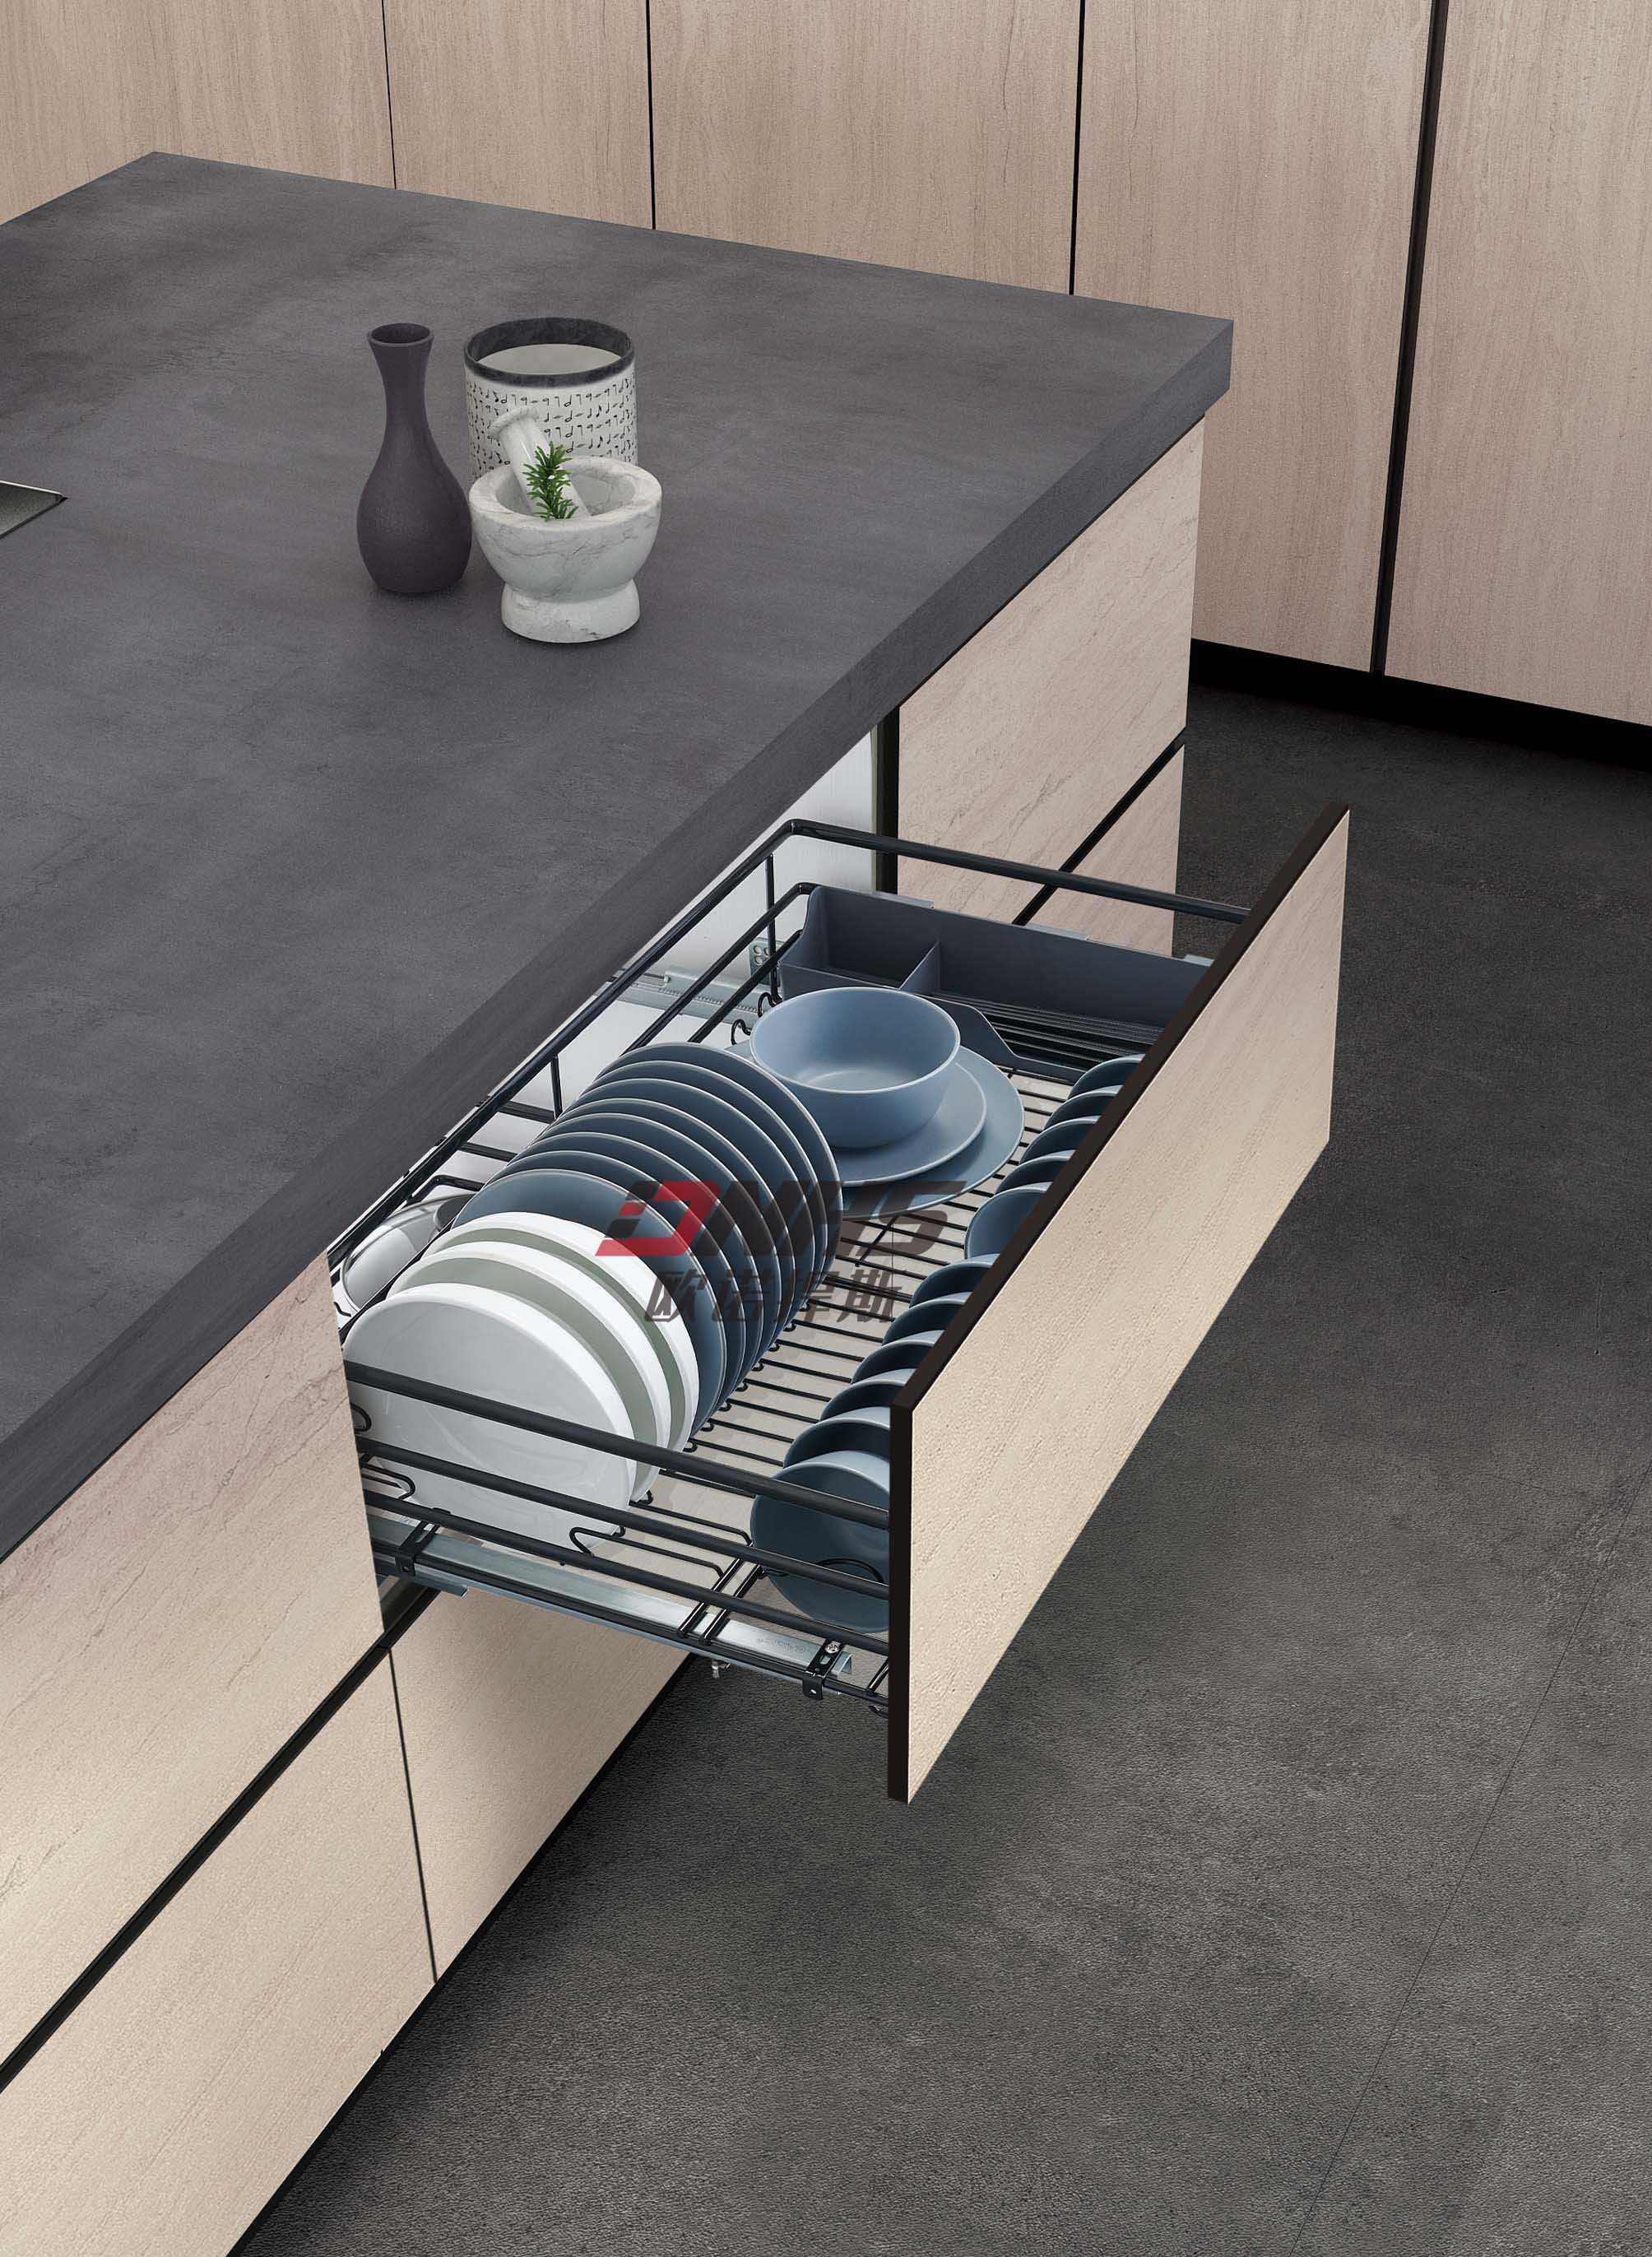 Simplify Your Kitchen with Our Blind Corner Cabinet Pull Out Organizer